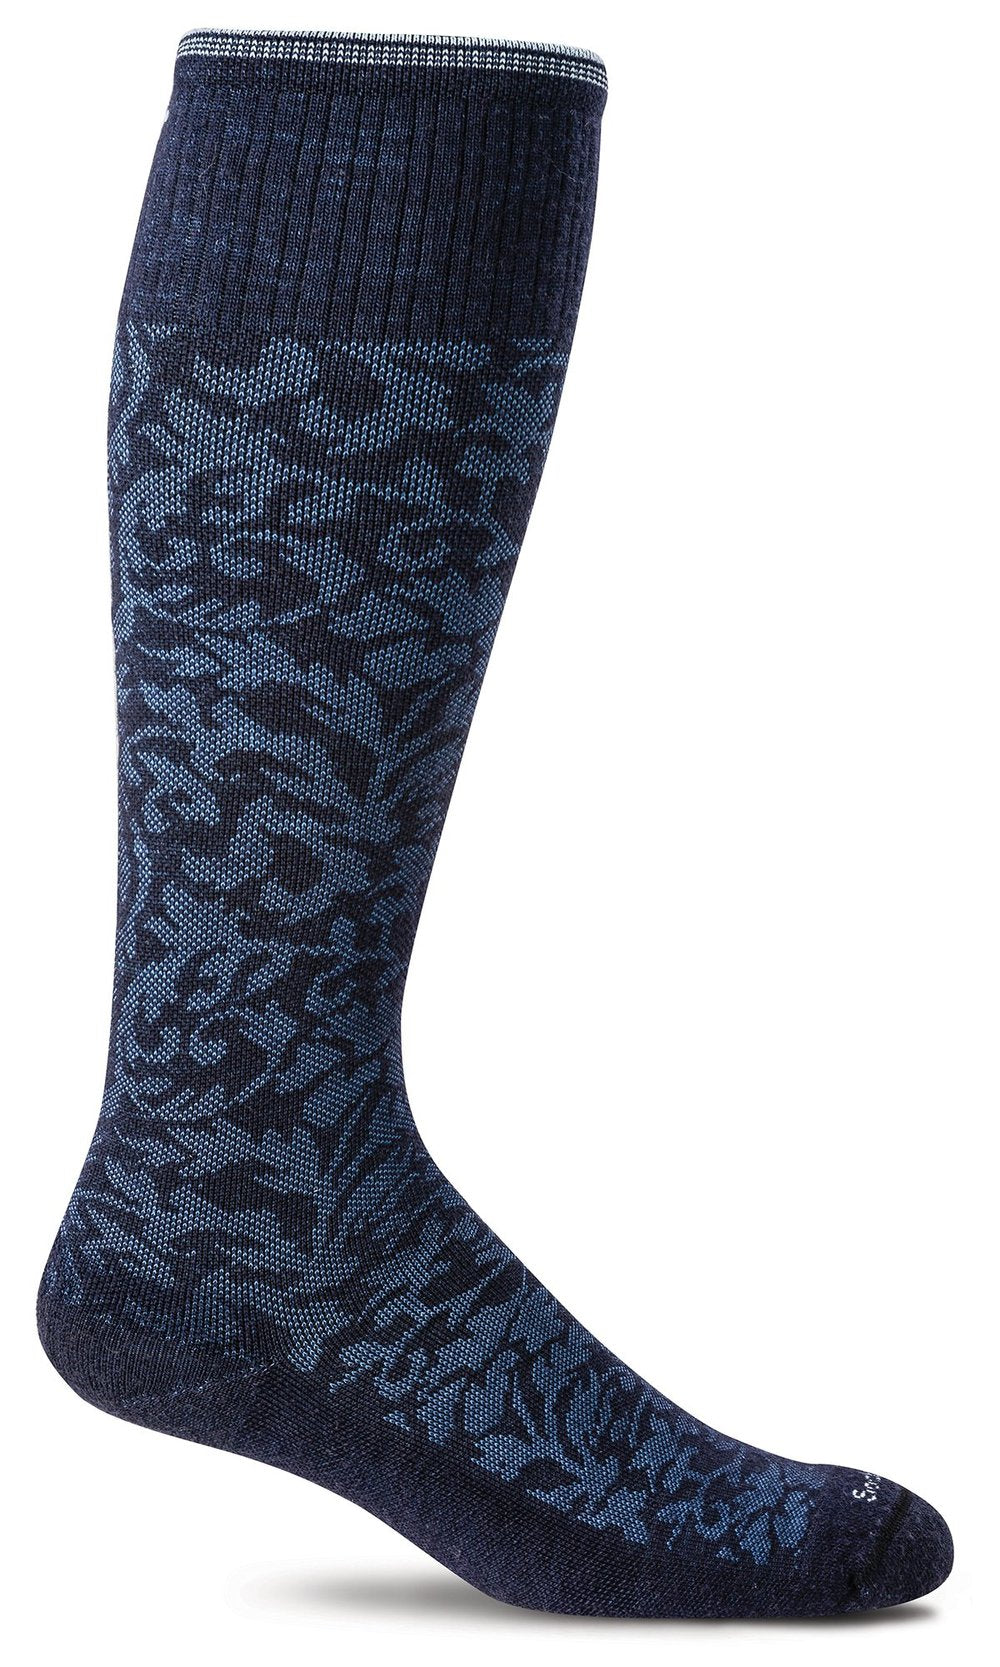 Sockwell Women's Moderate Compression Socks - Damask Navy